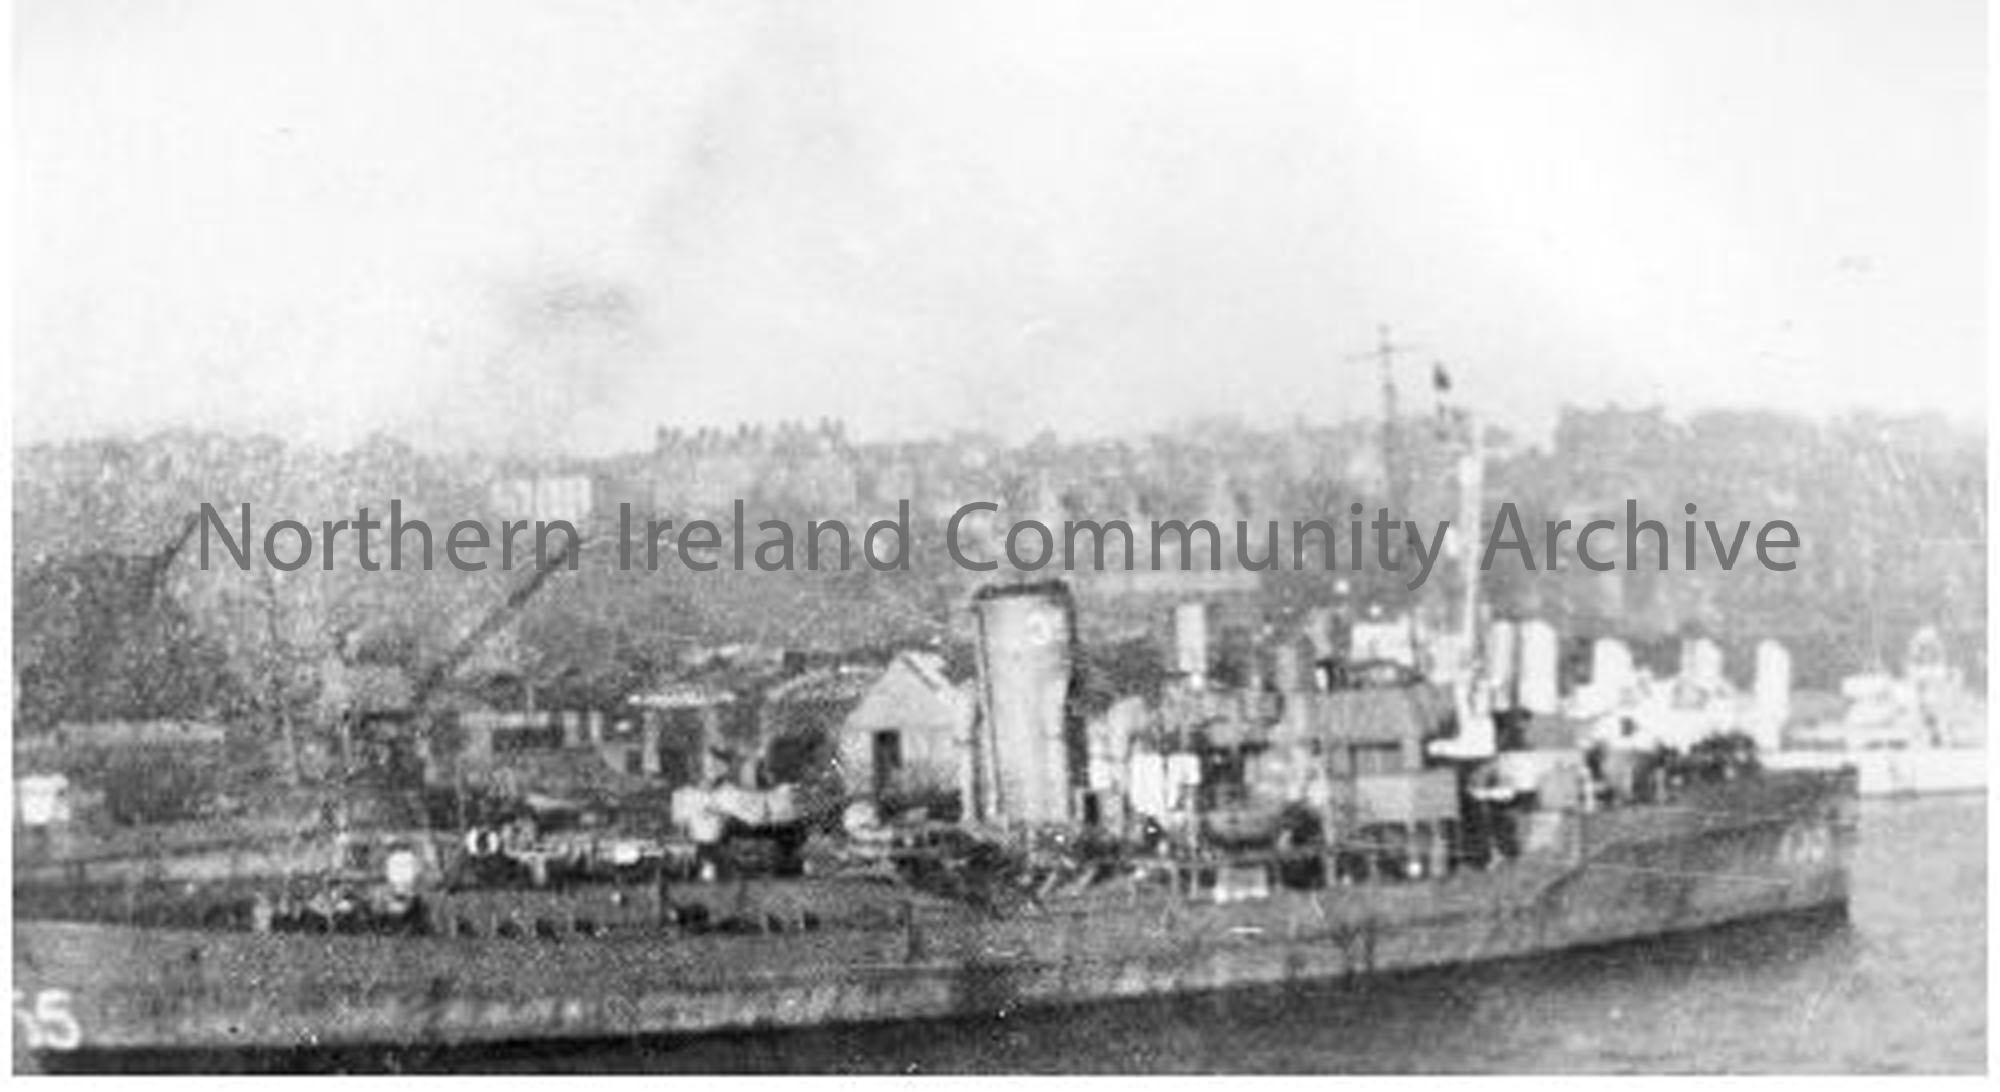 HMS Periwinkle
K 55  
Ship number 1059
Launched 24 Feb, 1940  
Commissioned 8 Apr, 1940  
 (5793)